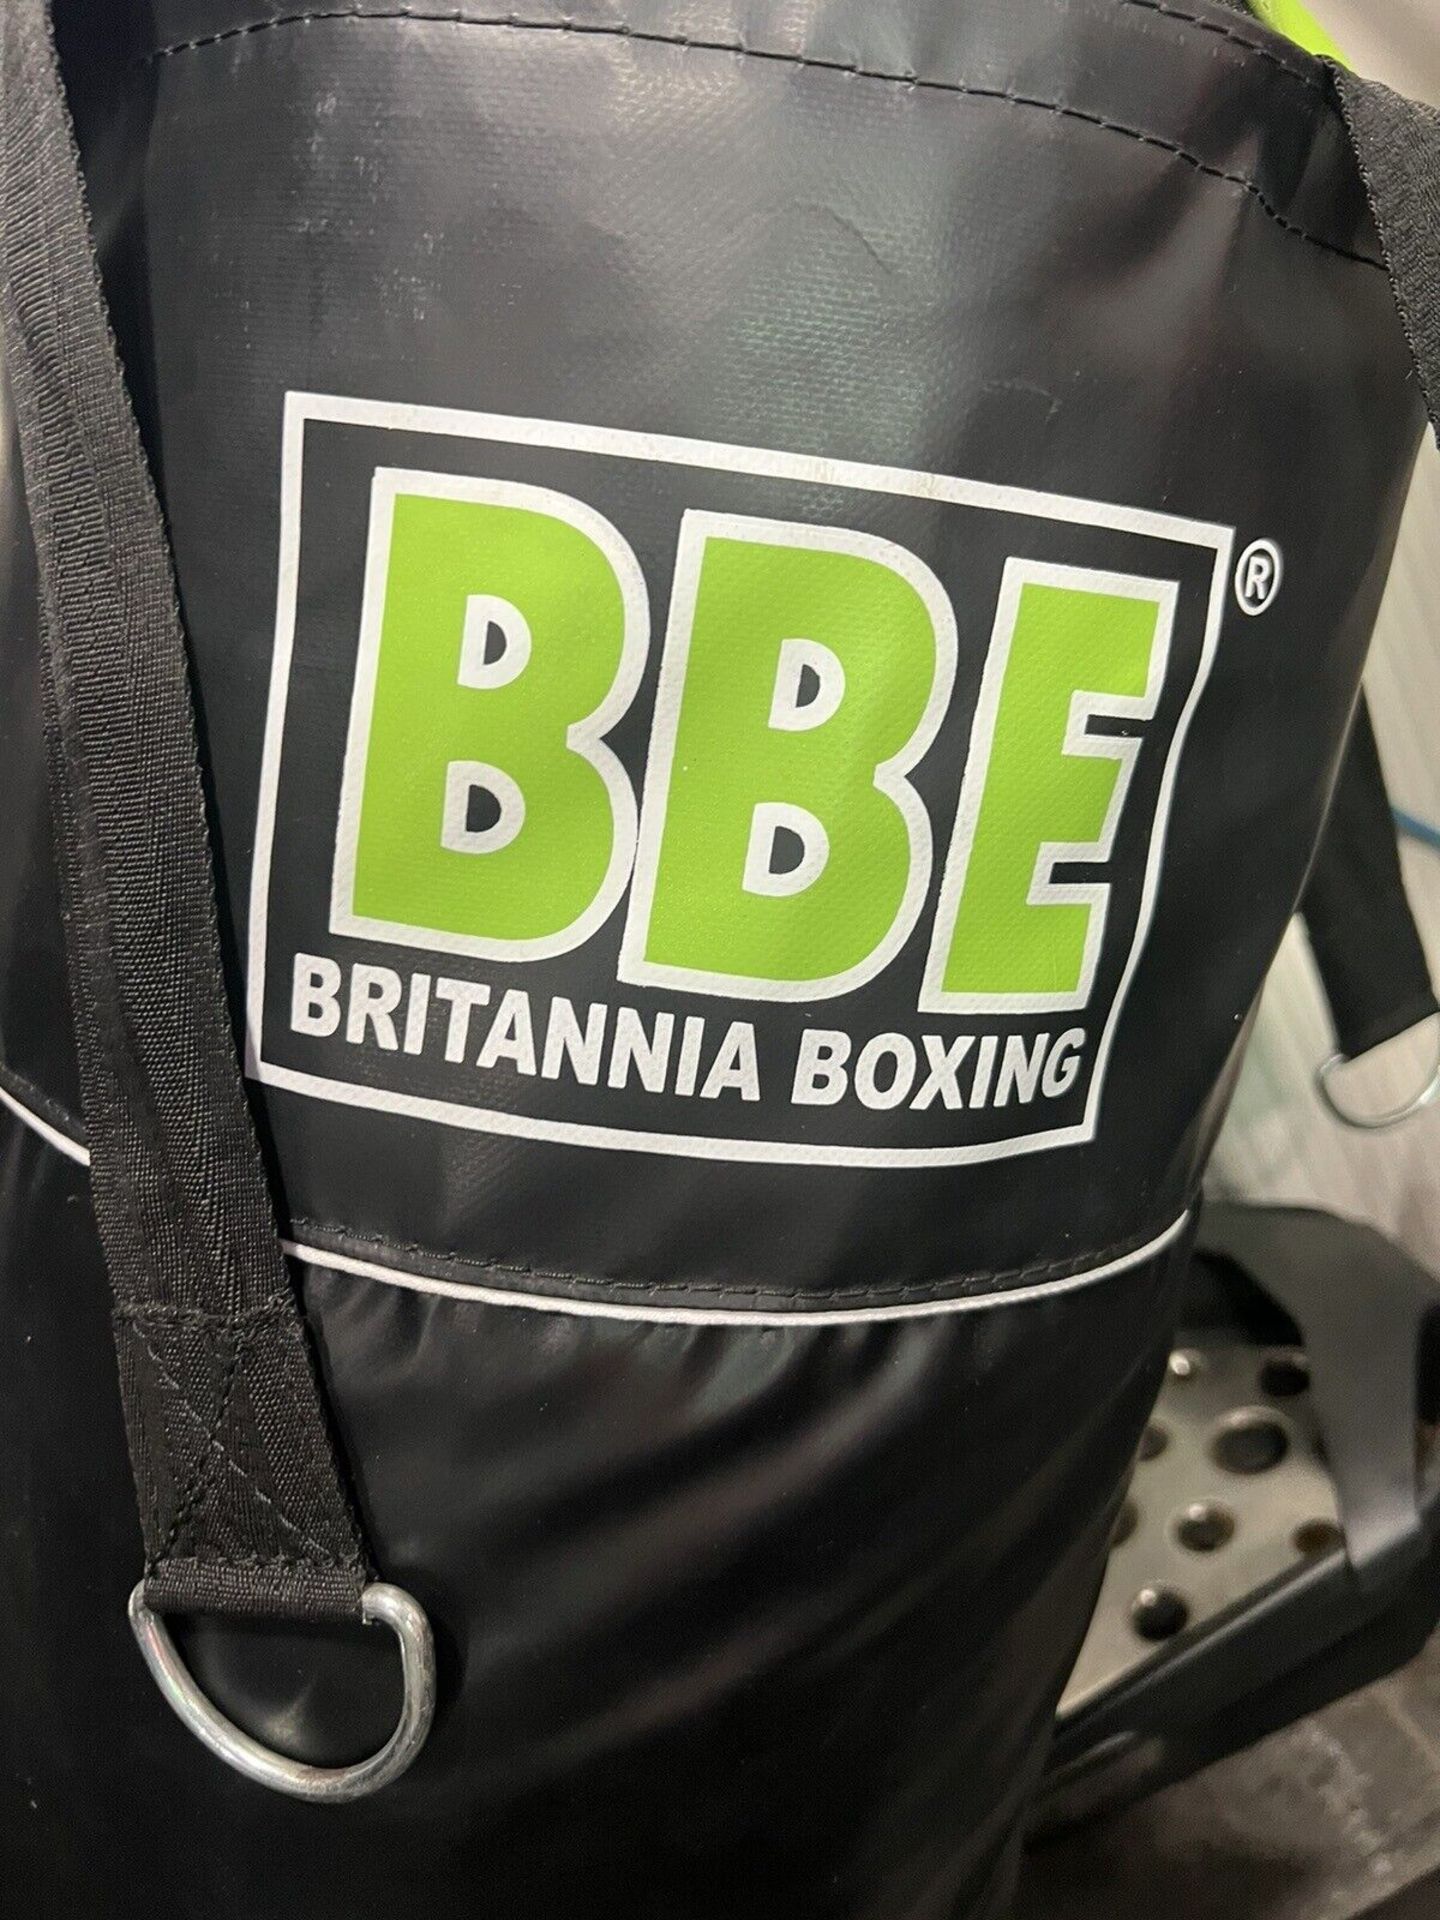 BBE Britannia Boxing Punch Bag - Great Condition - Image 2 of 4